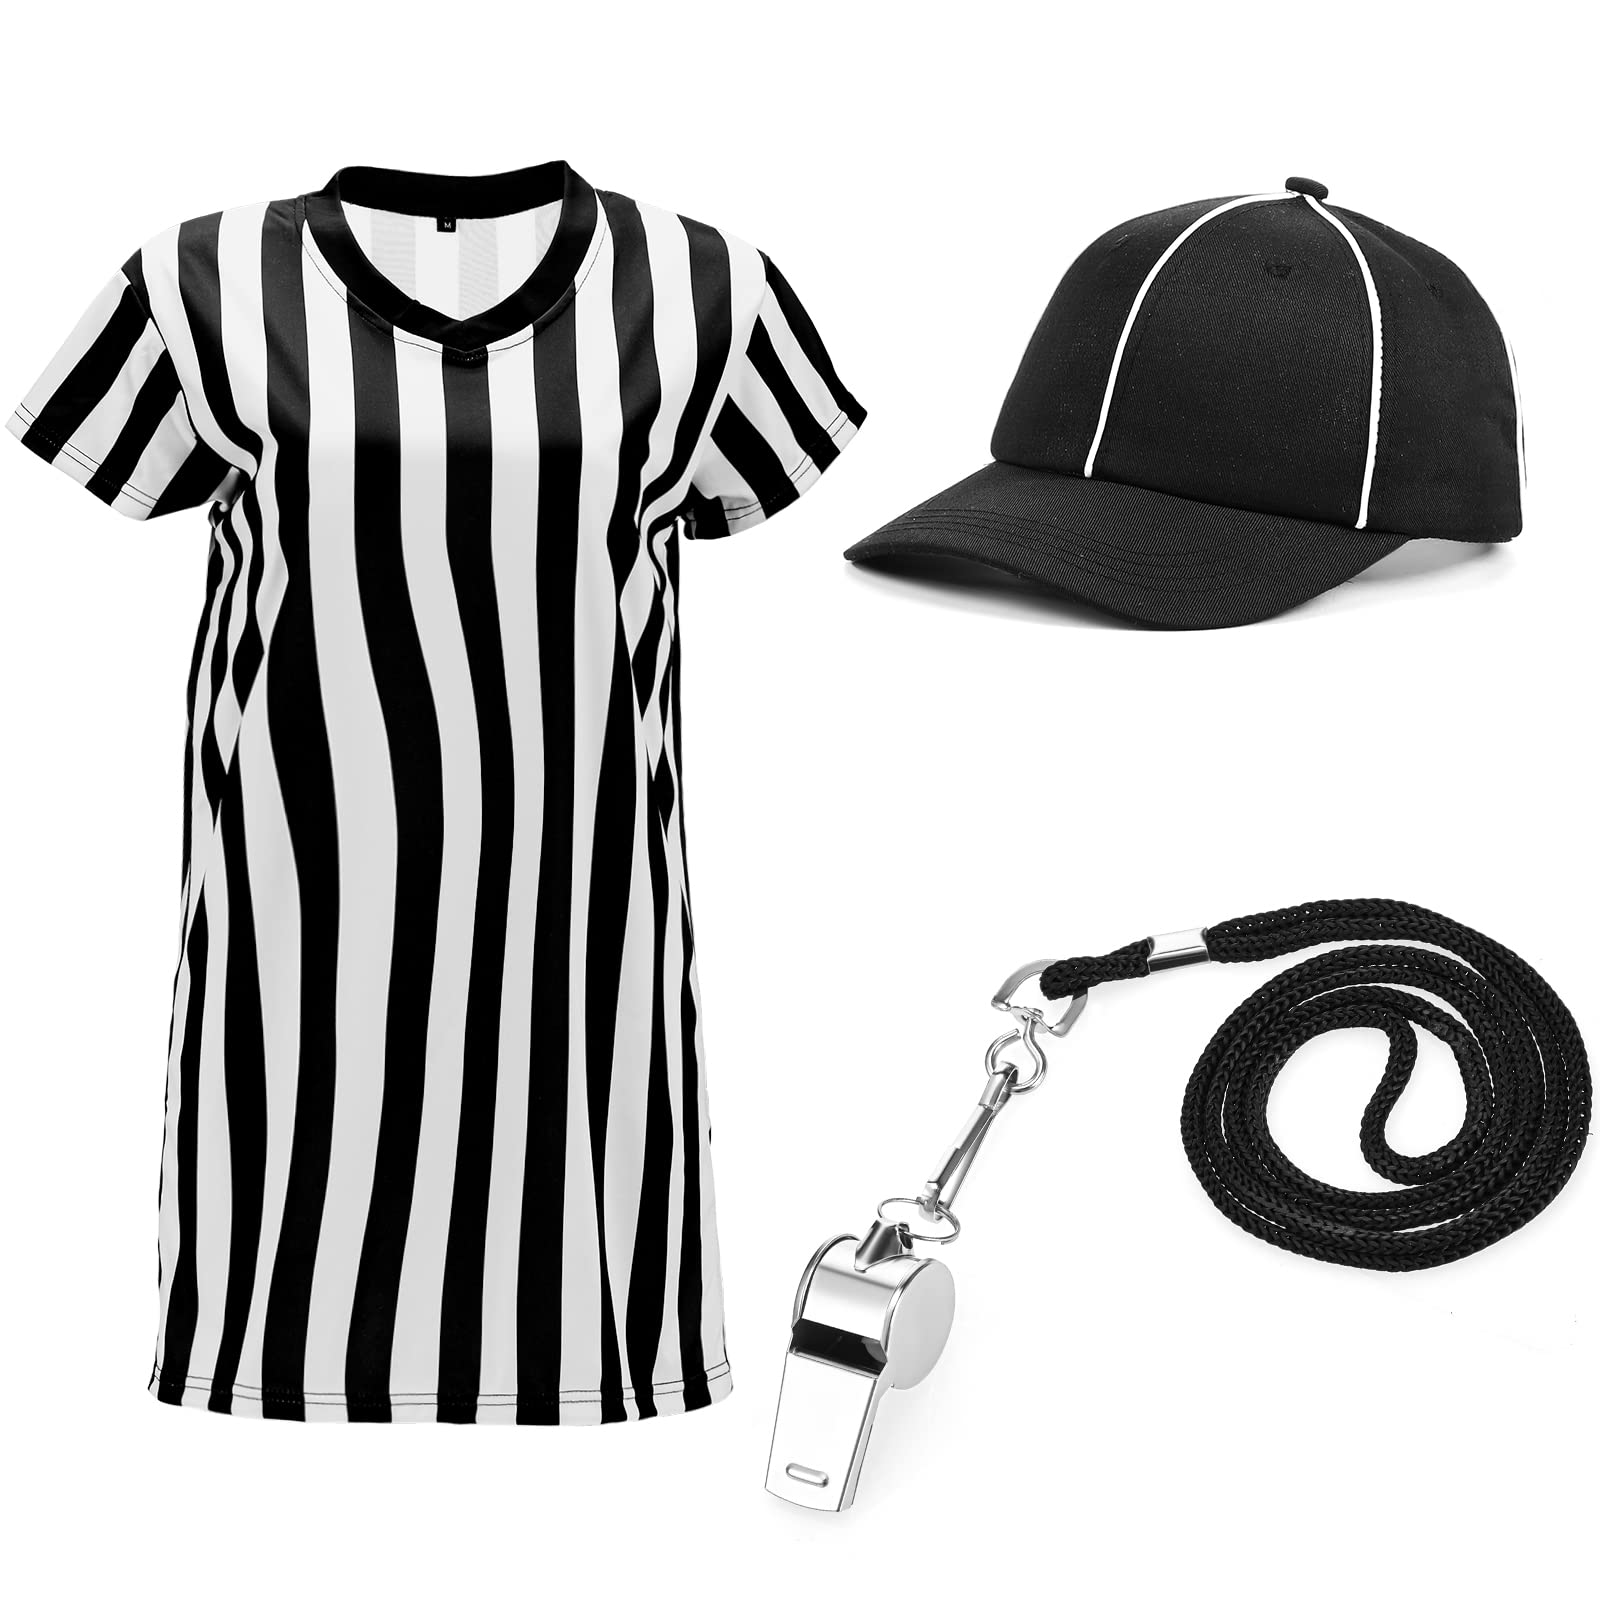 Women's Official Striped Referee-Umpire Jersey, S